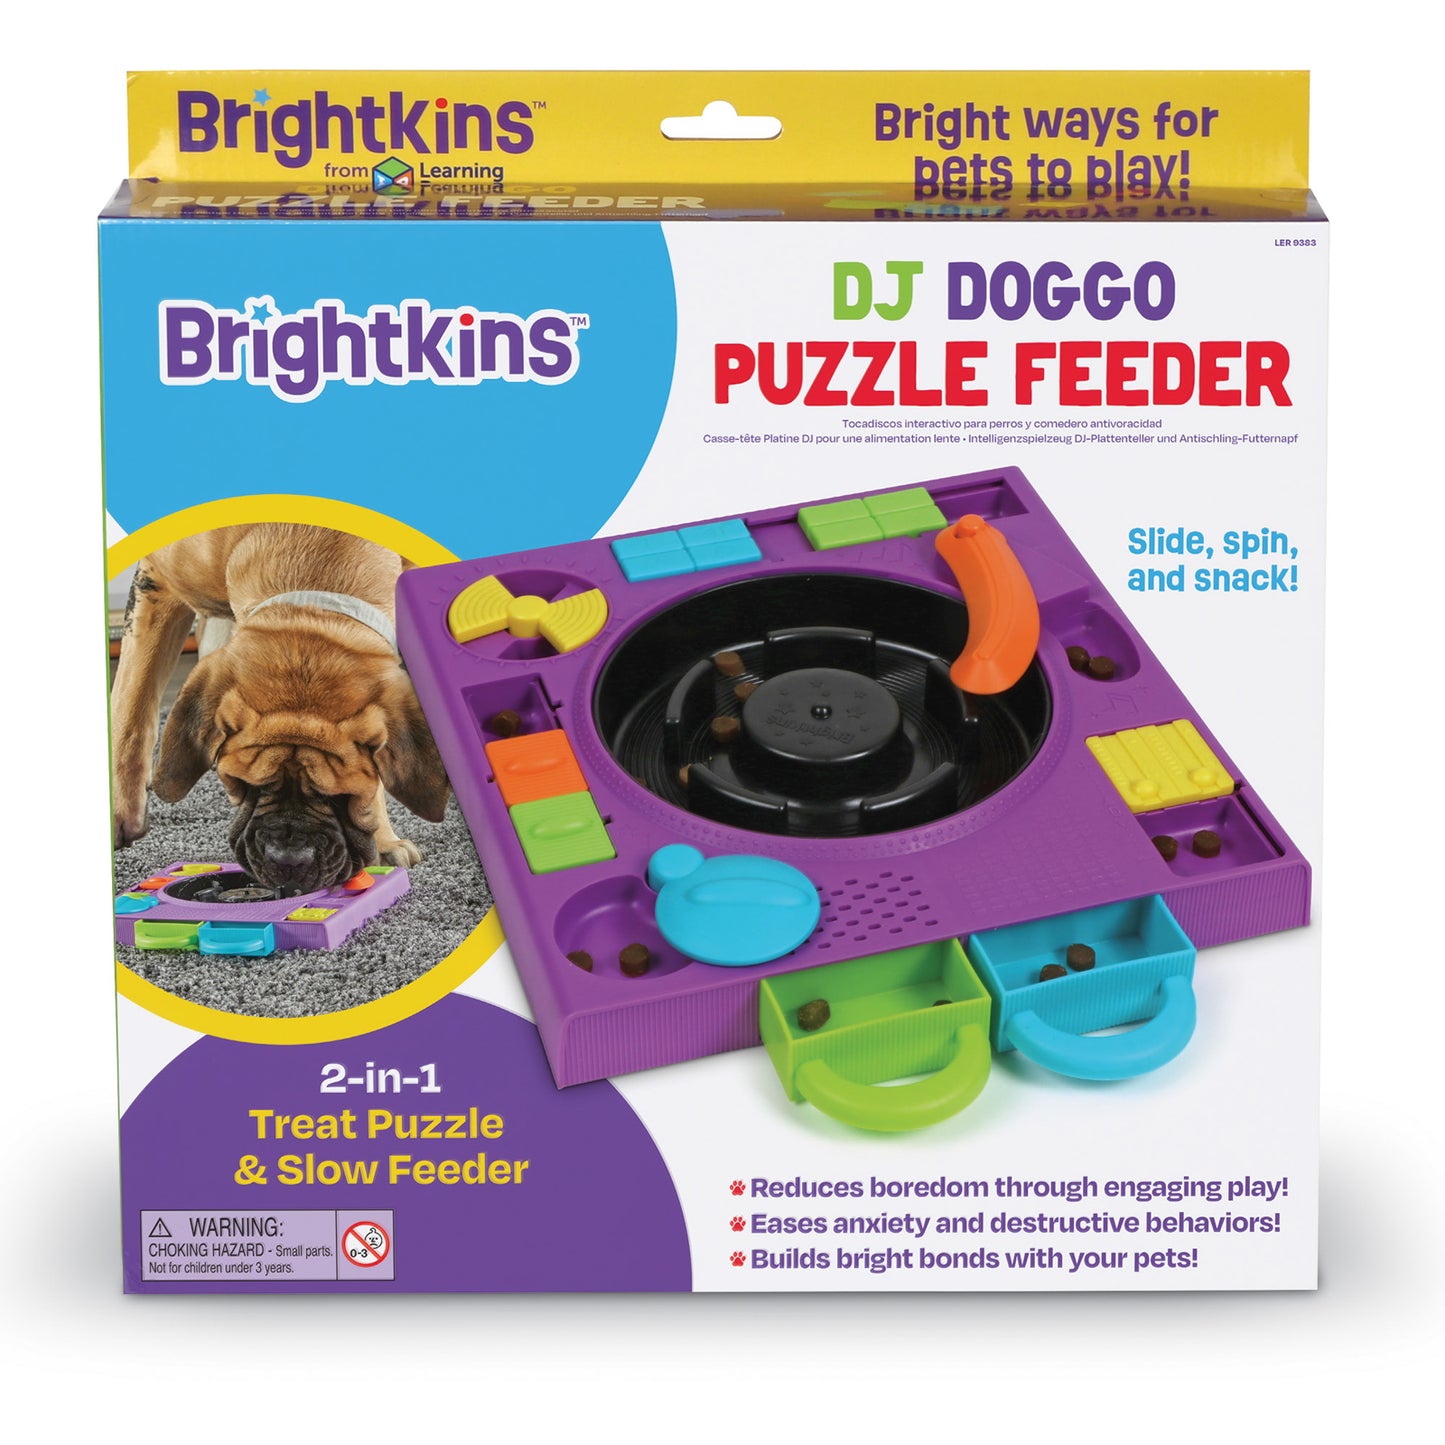 A box containing a purple turntable style food puzzle for dogs